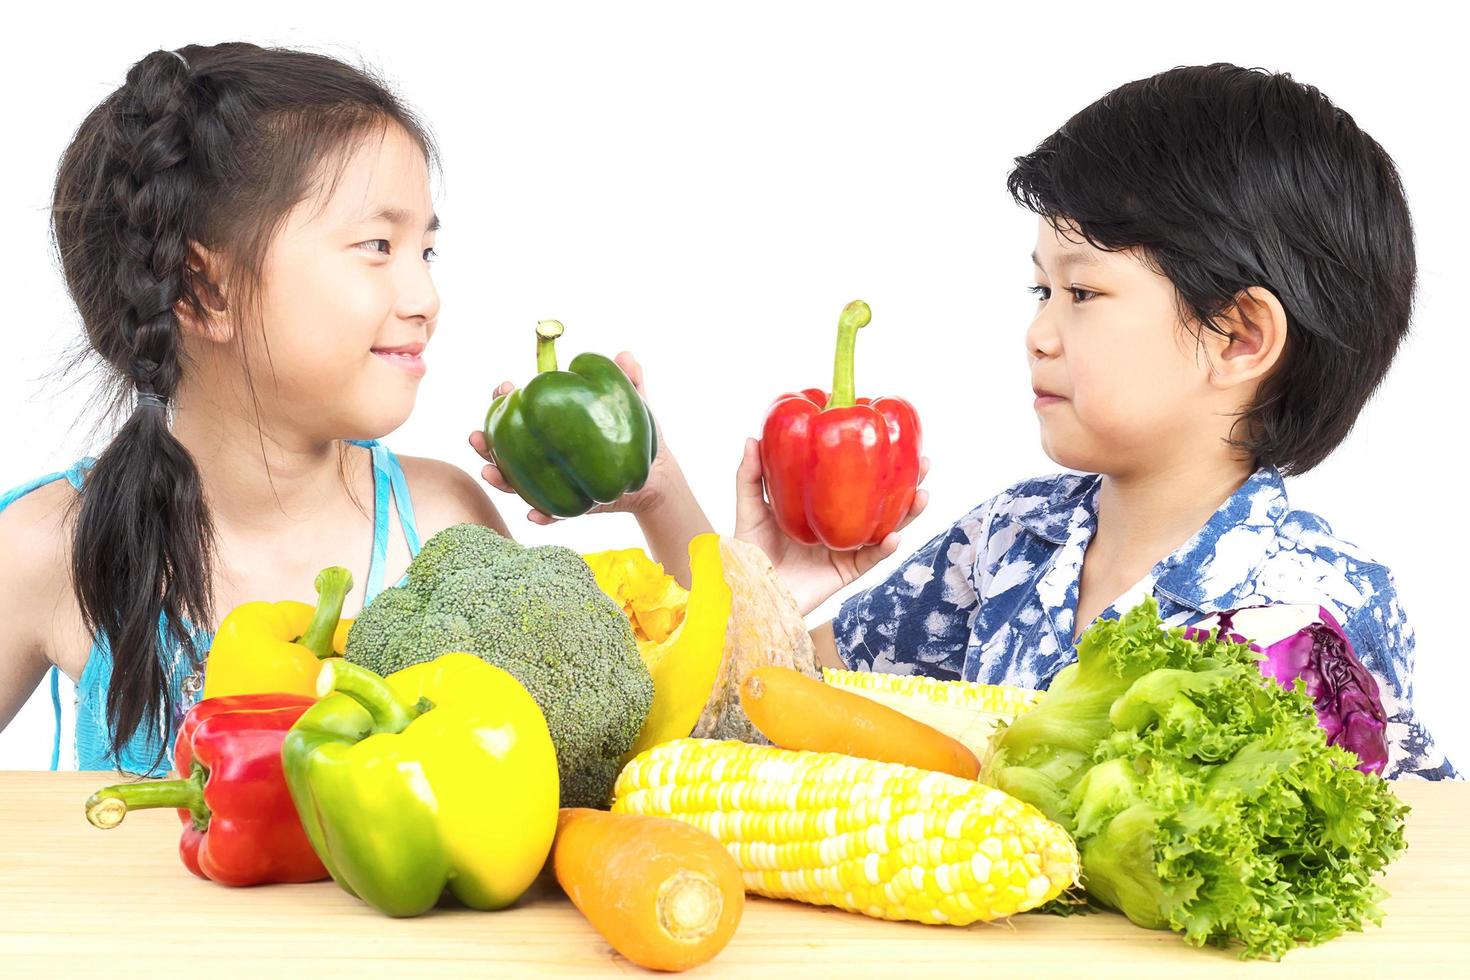 Asian boy and girl showing enjoy expression with fresh colorful vegetables isolated over white background photo